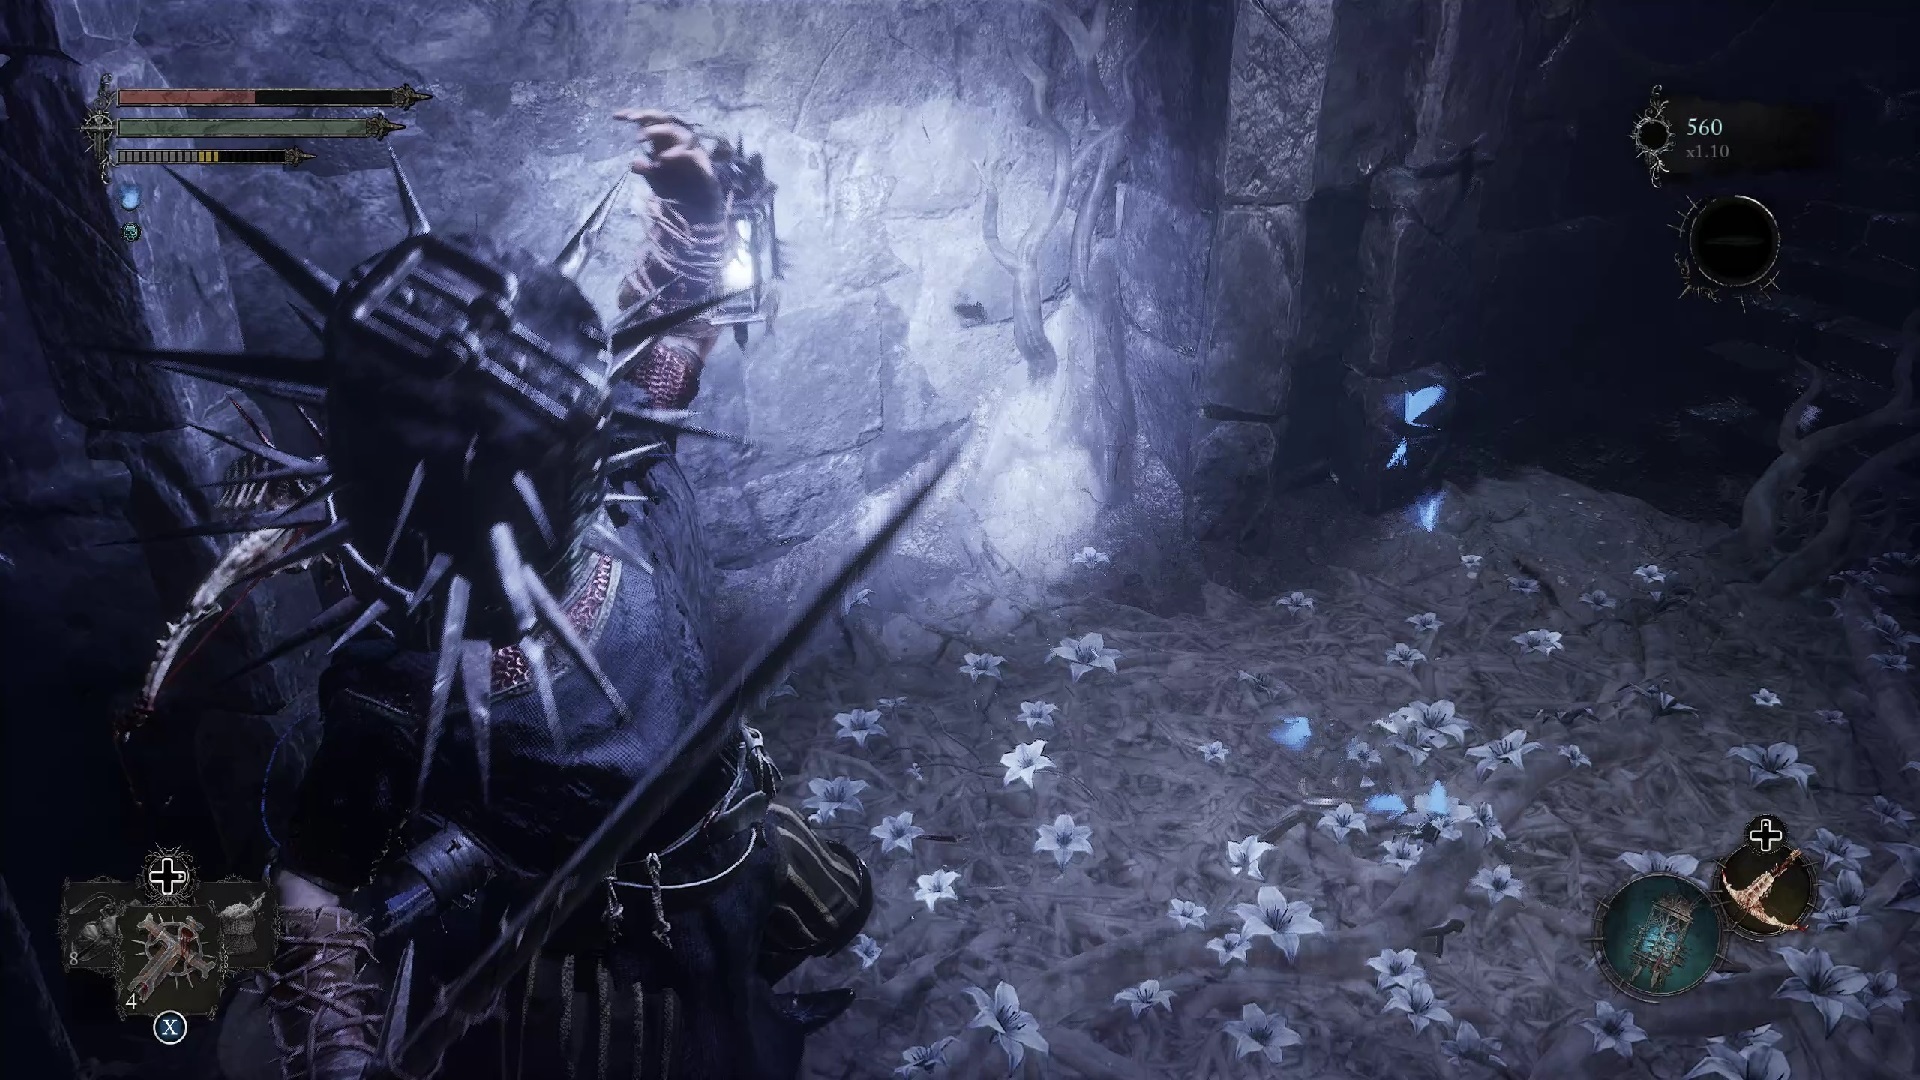 New Demon's Souls gameplay gives closer look at realms, bosses